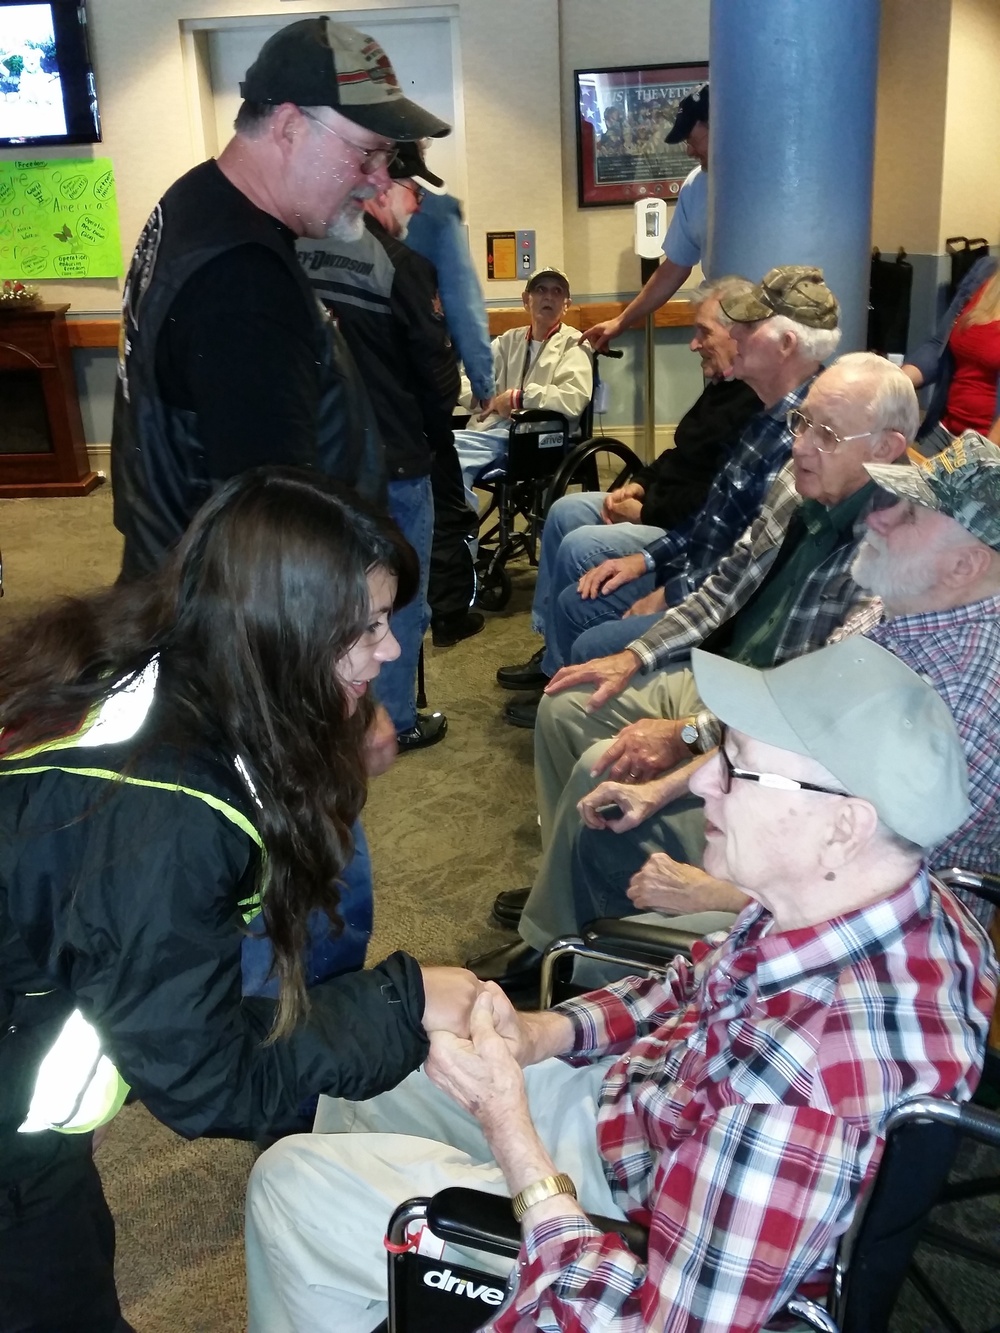 A visit with the veterans